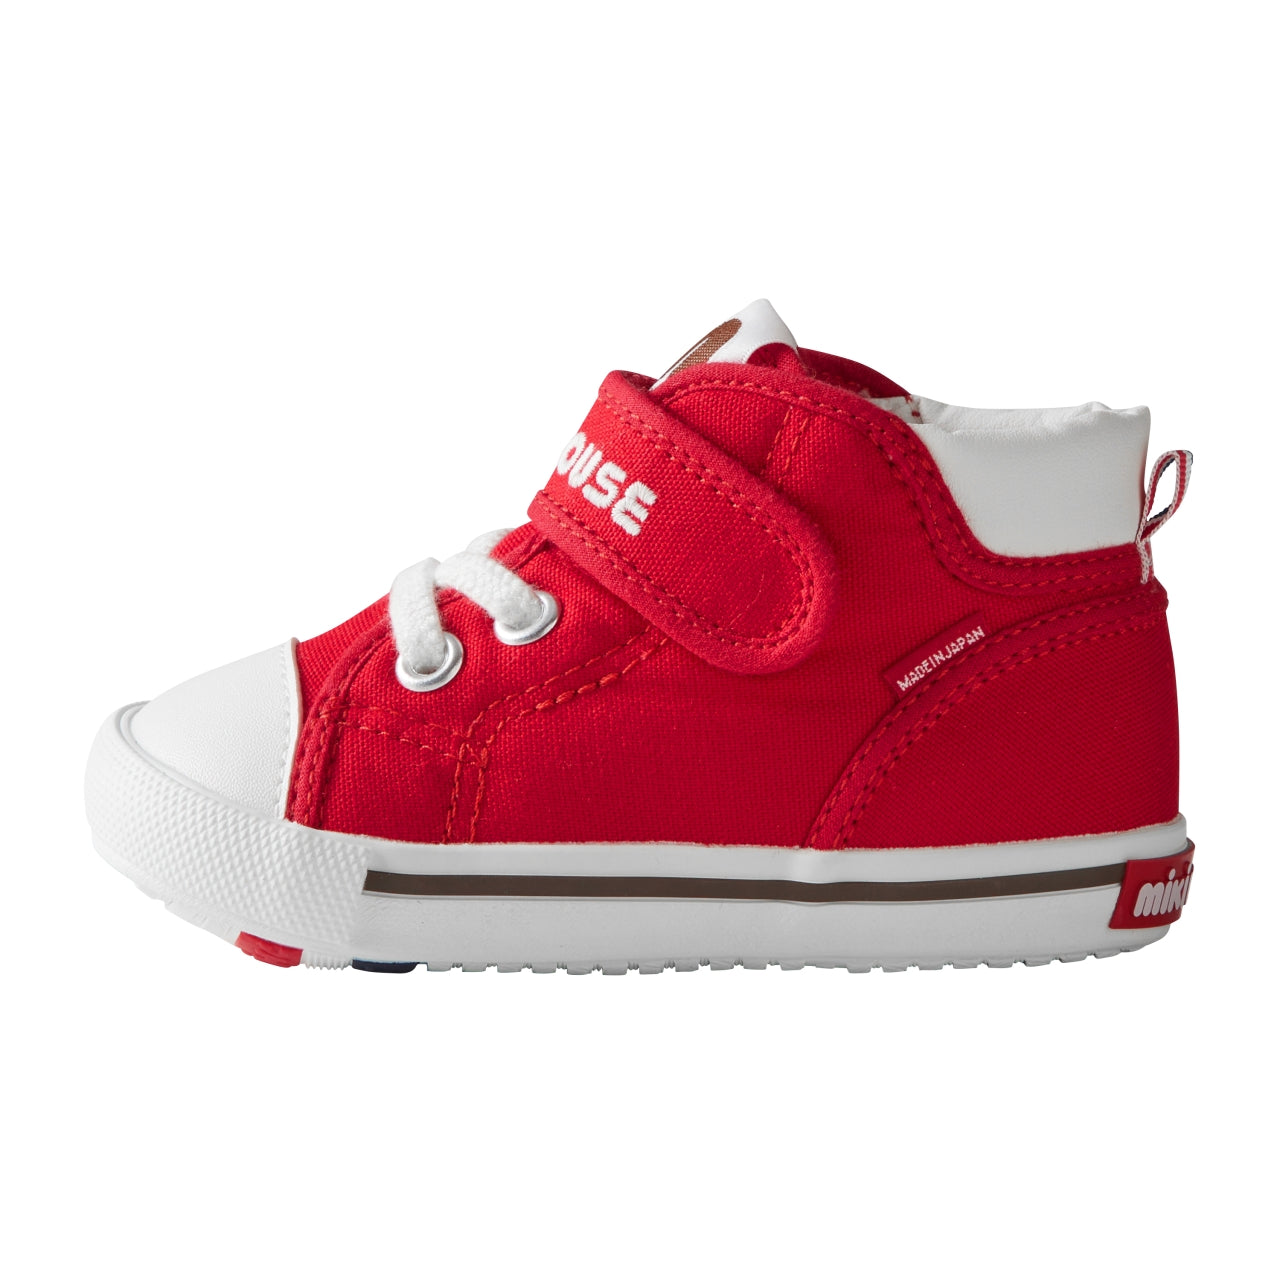 New! Classic High Top Second Shoes